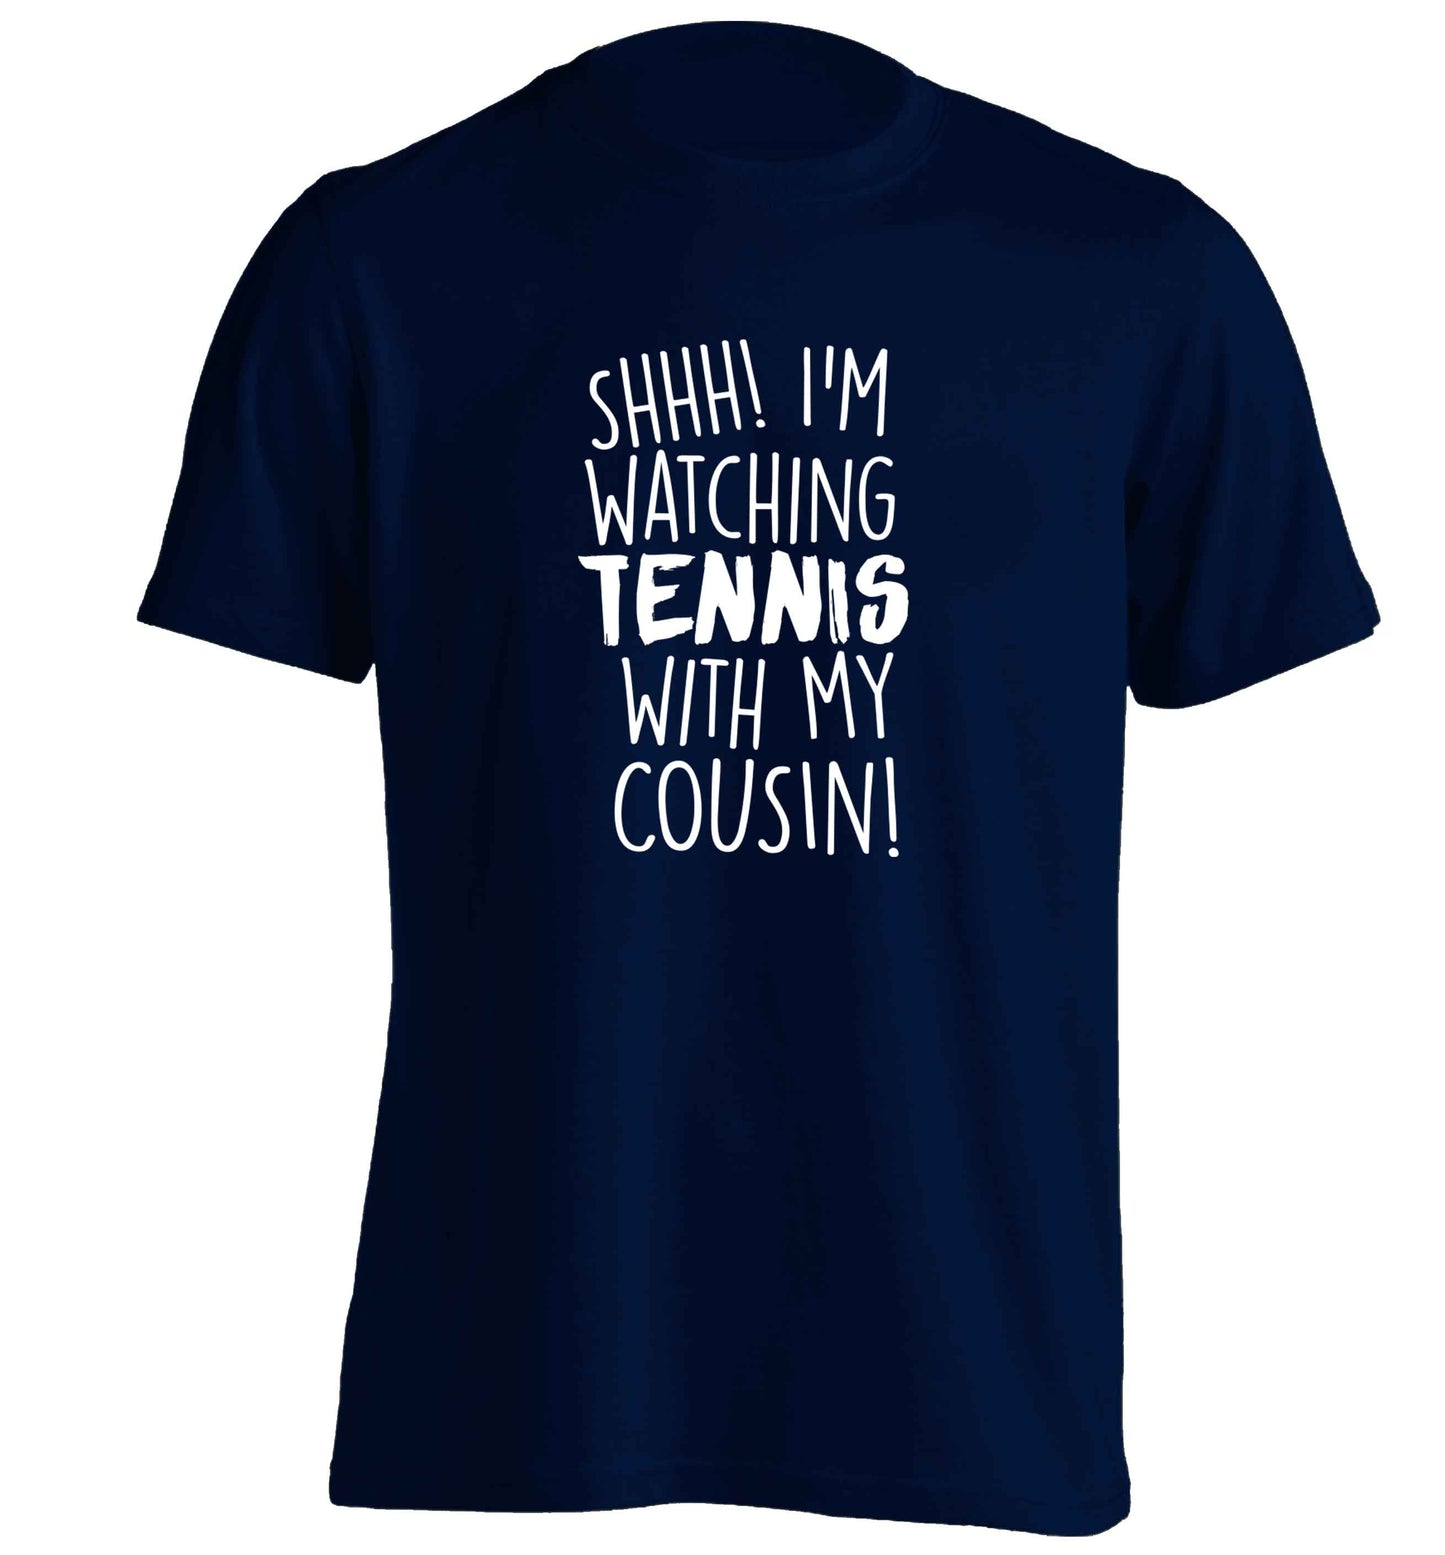 Shh! I'm watching tennis with my cousin! adults unisex navy Tshirt 2XL